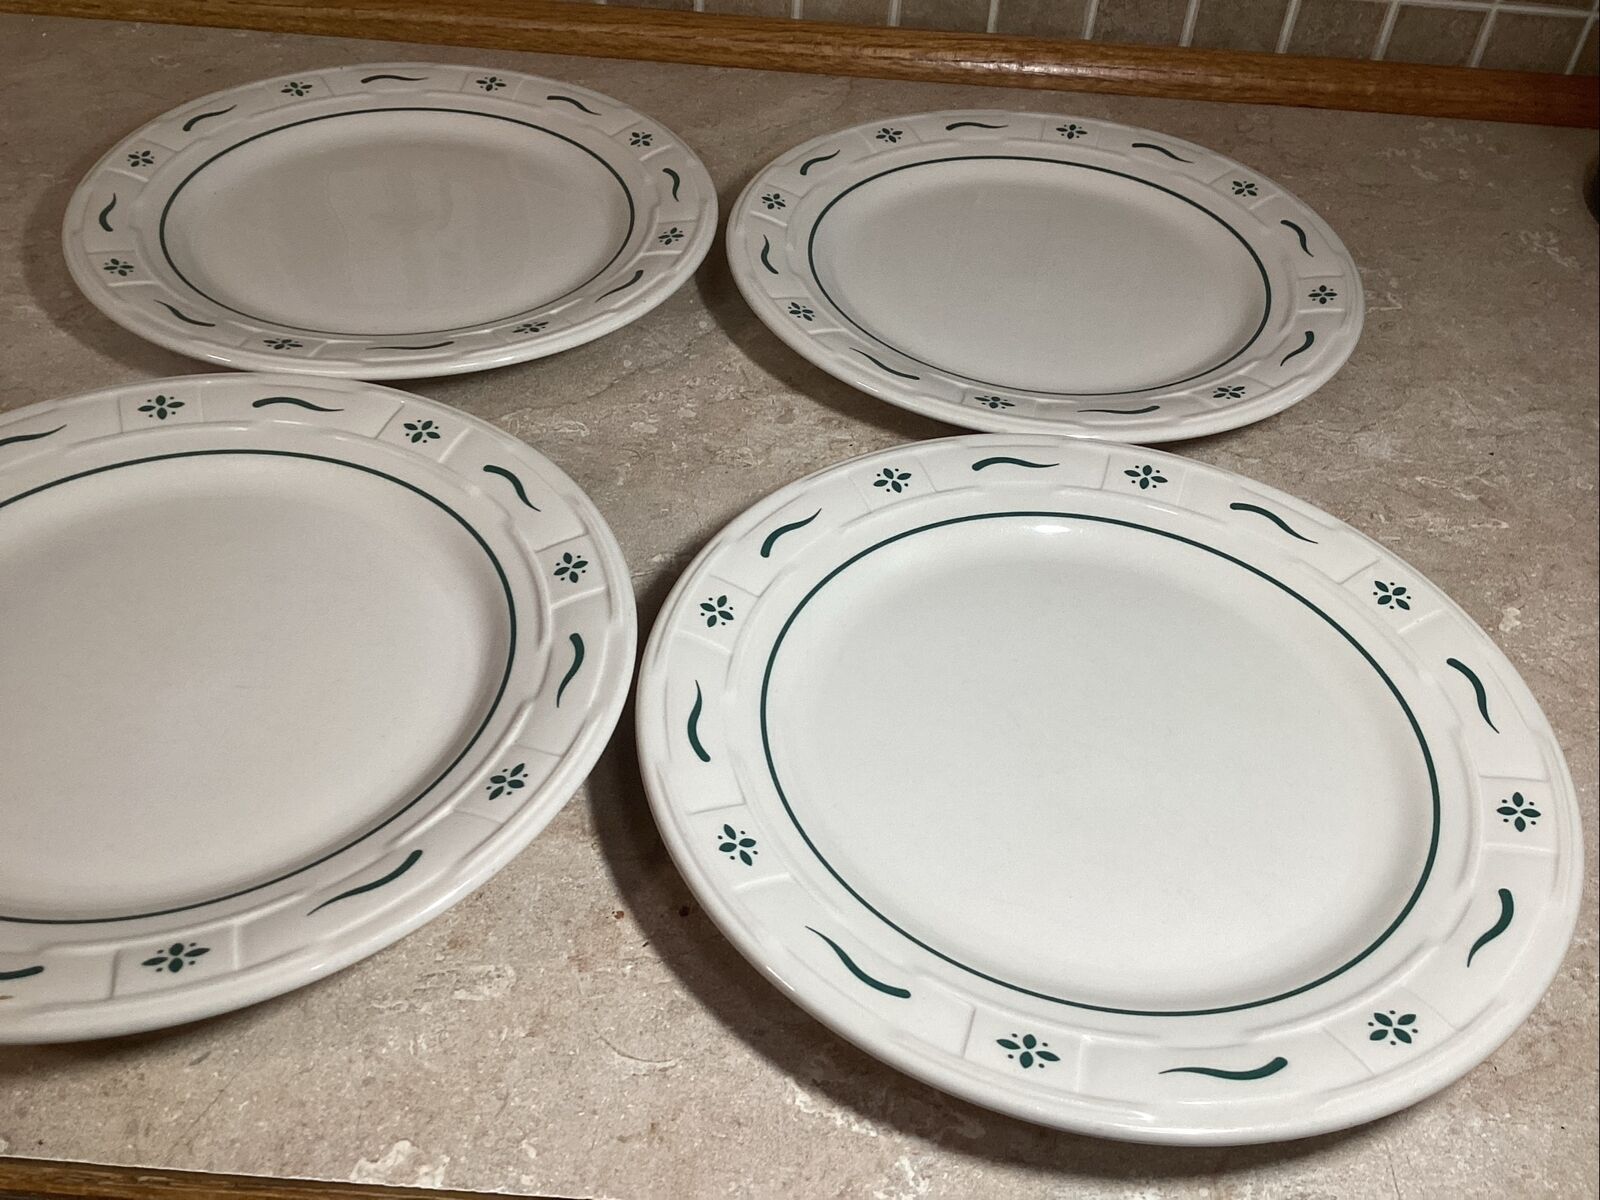 FOUR Longaberger Pottery Woven Traditions Heritage Green 10